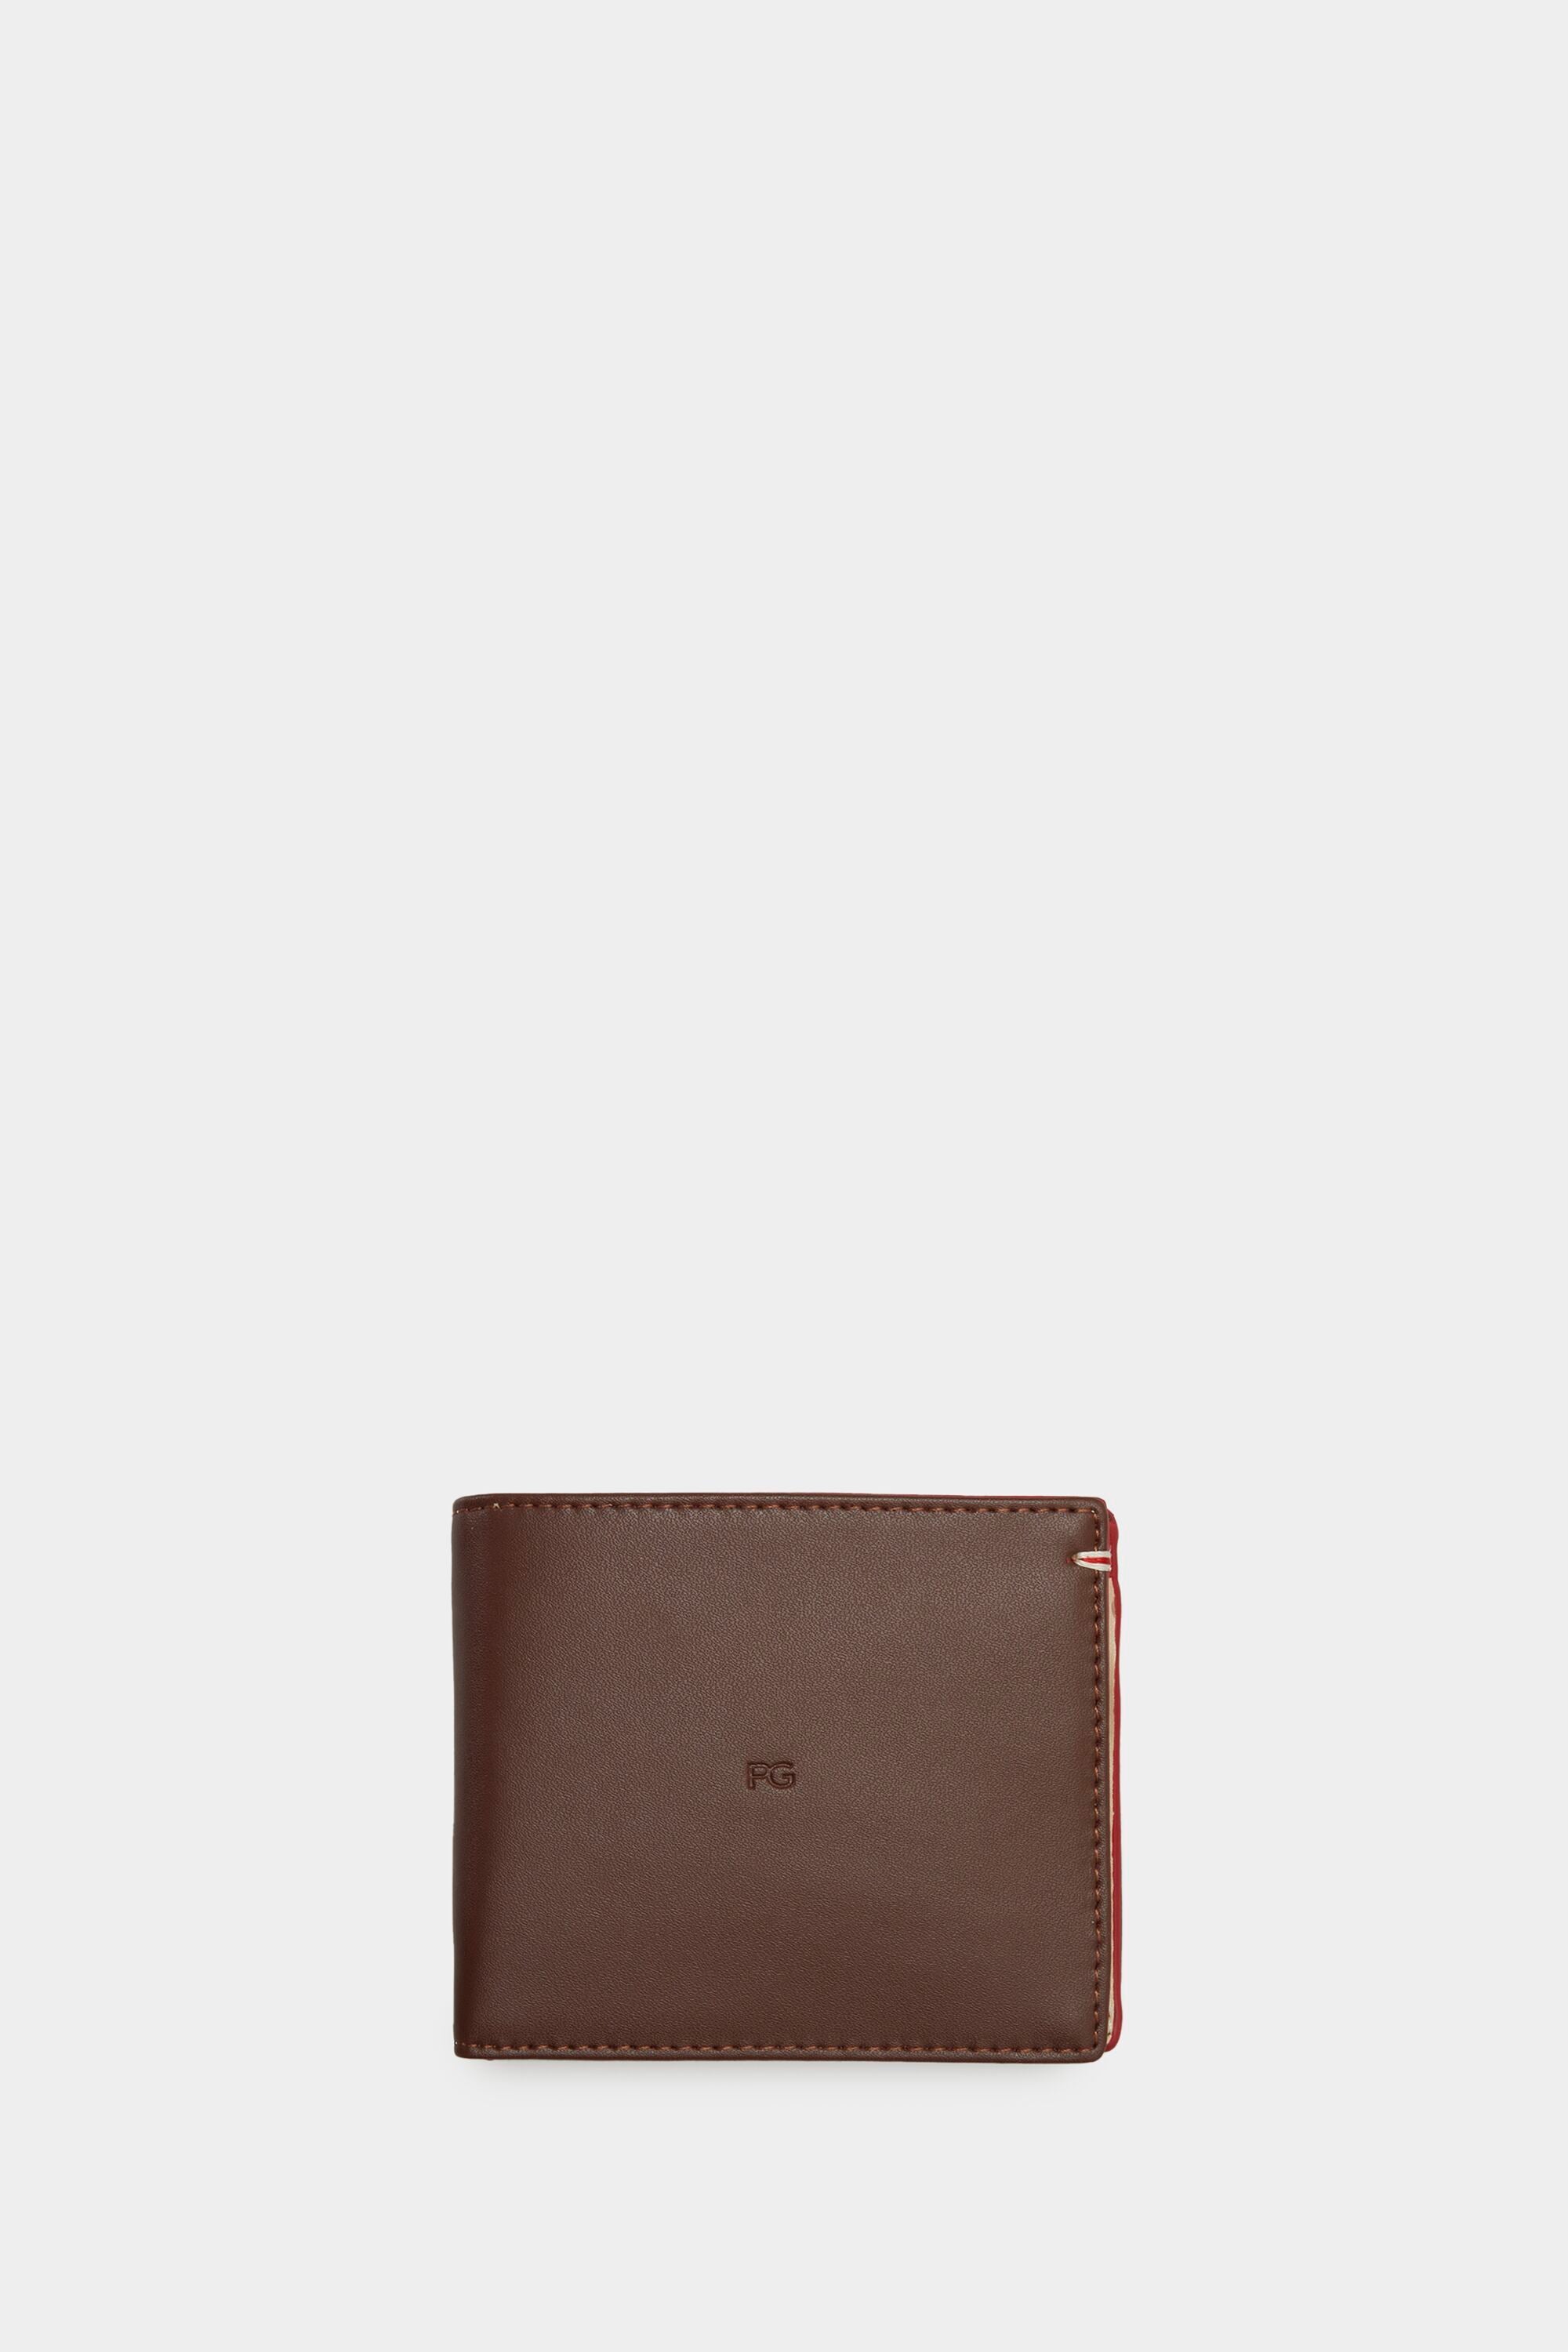 PG wallet with coin purse